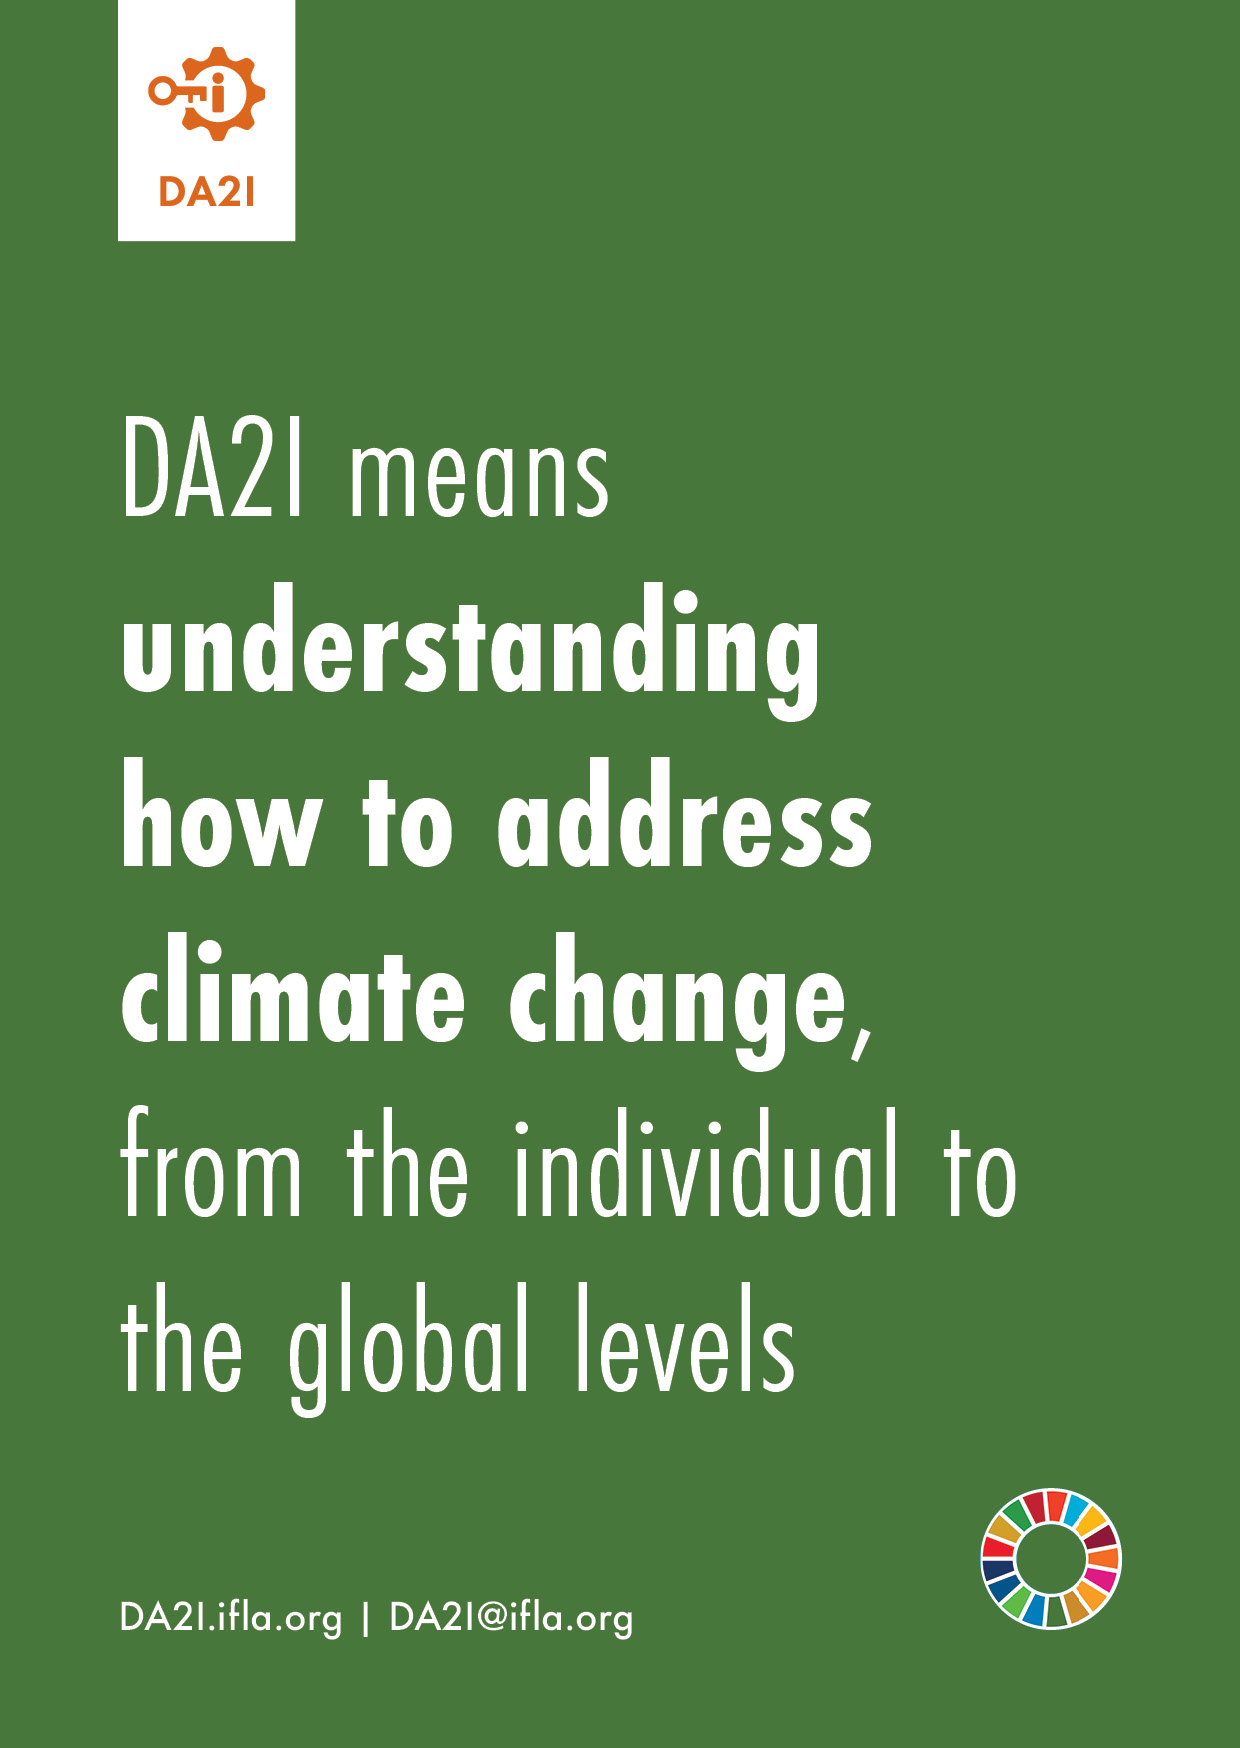 DA2I means understanding how to address climate change, from the individual to the global levels